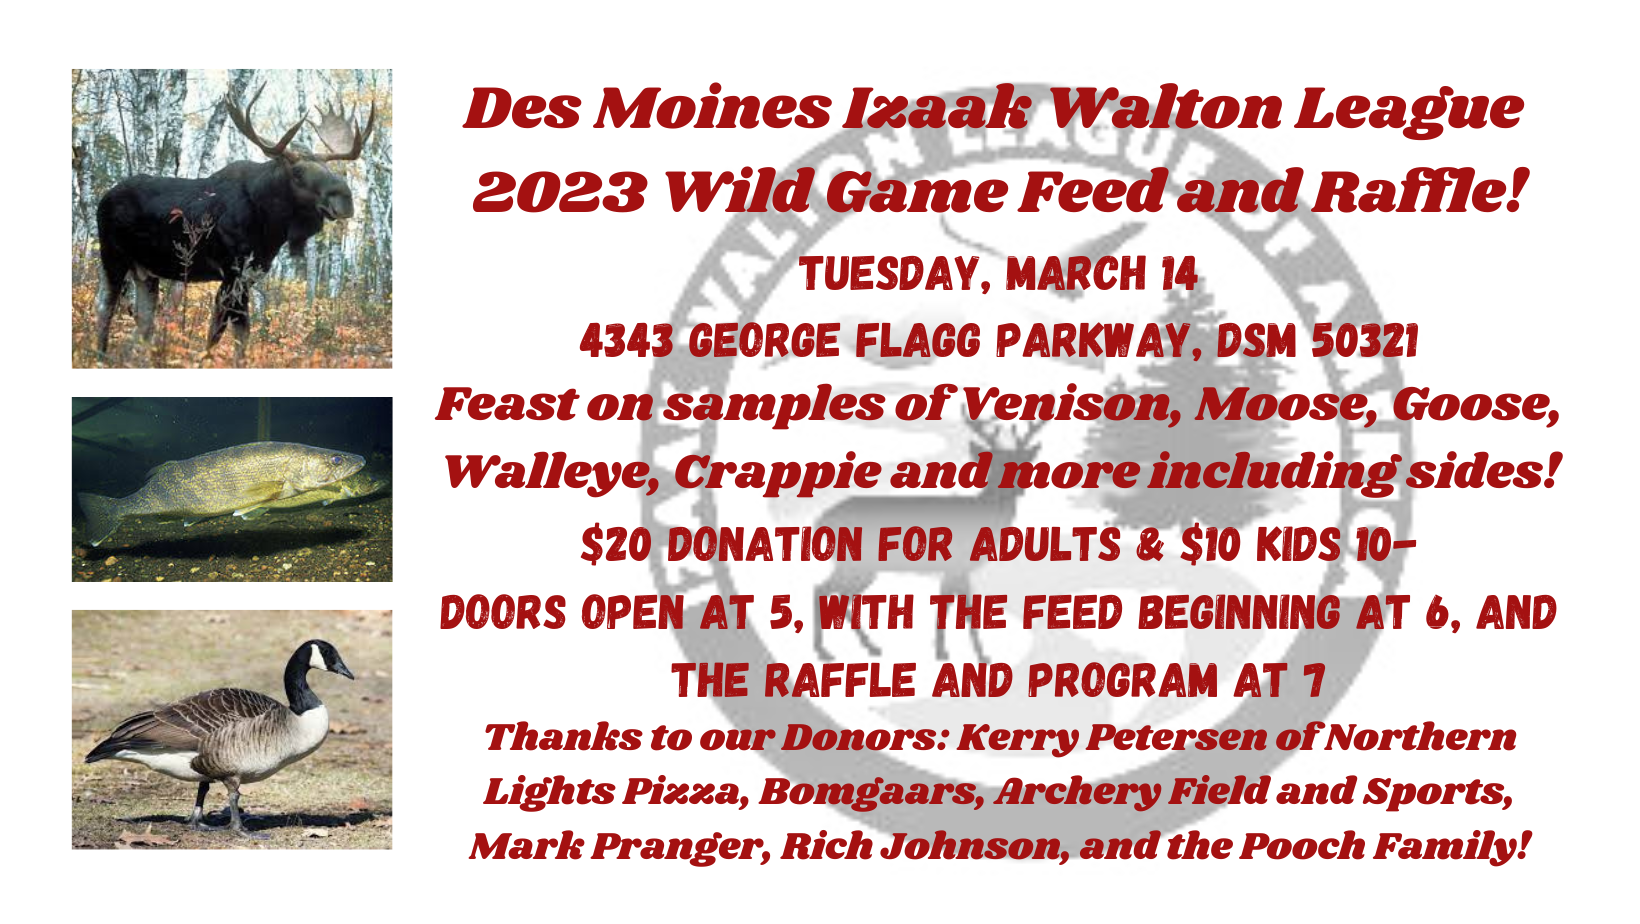 Second Annual Wild Game Feed - Des Moines Iza